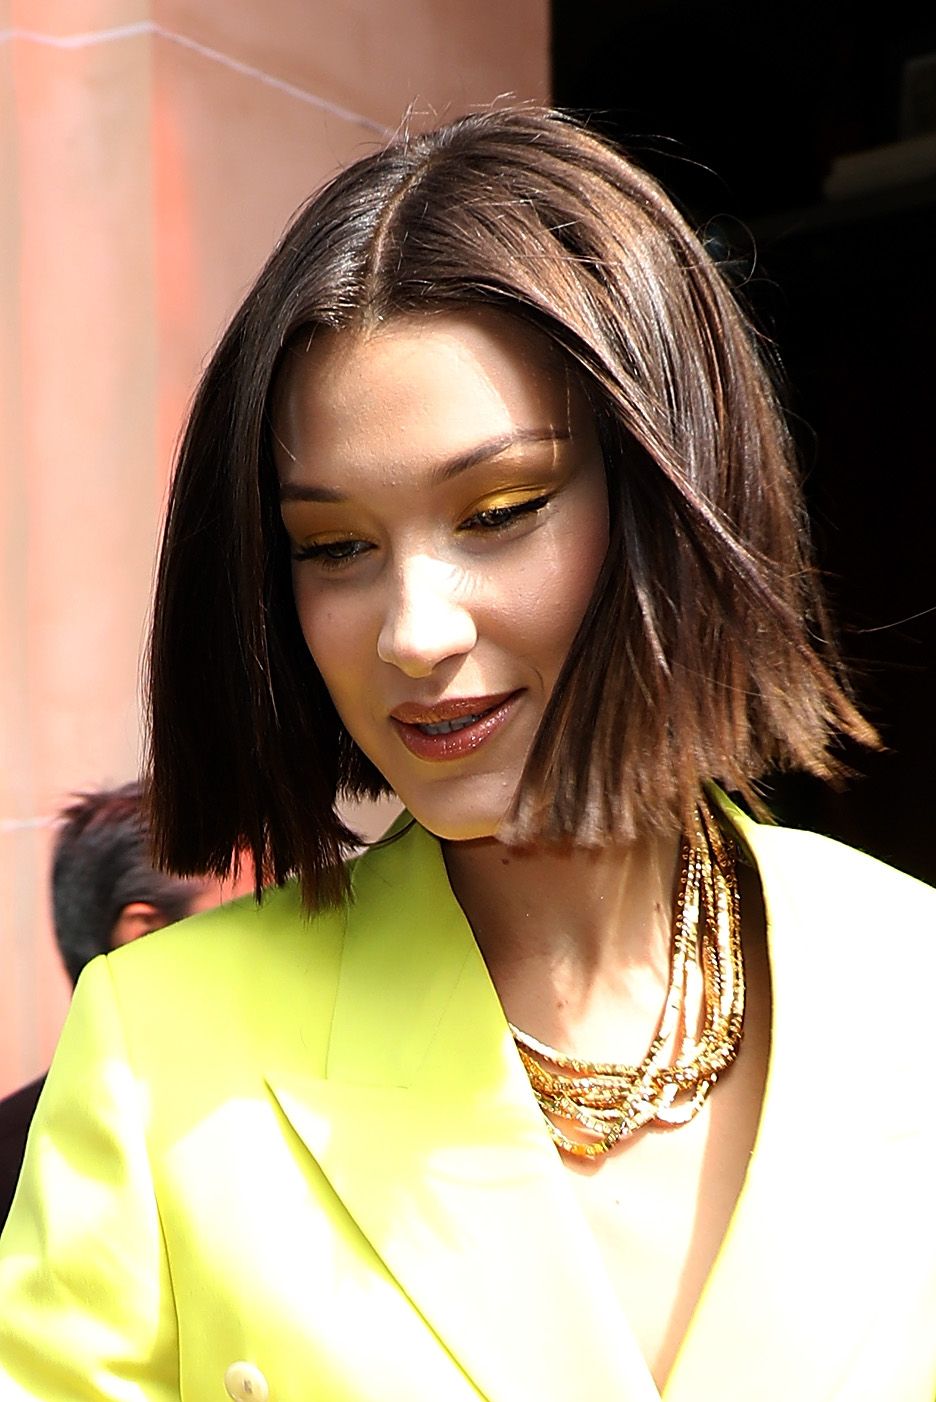 Is Bella making a political statement? Hadid wears a hi vis yellow